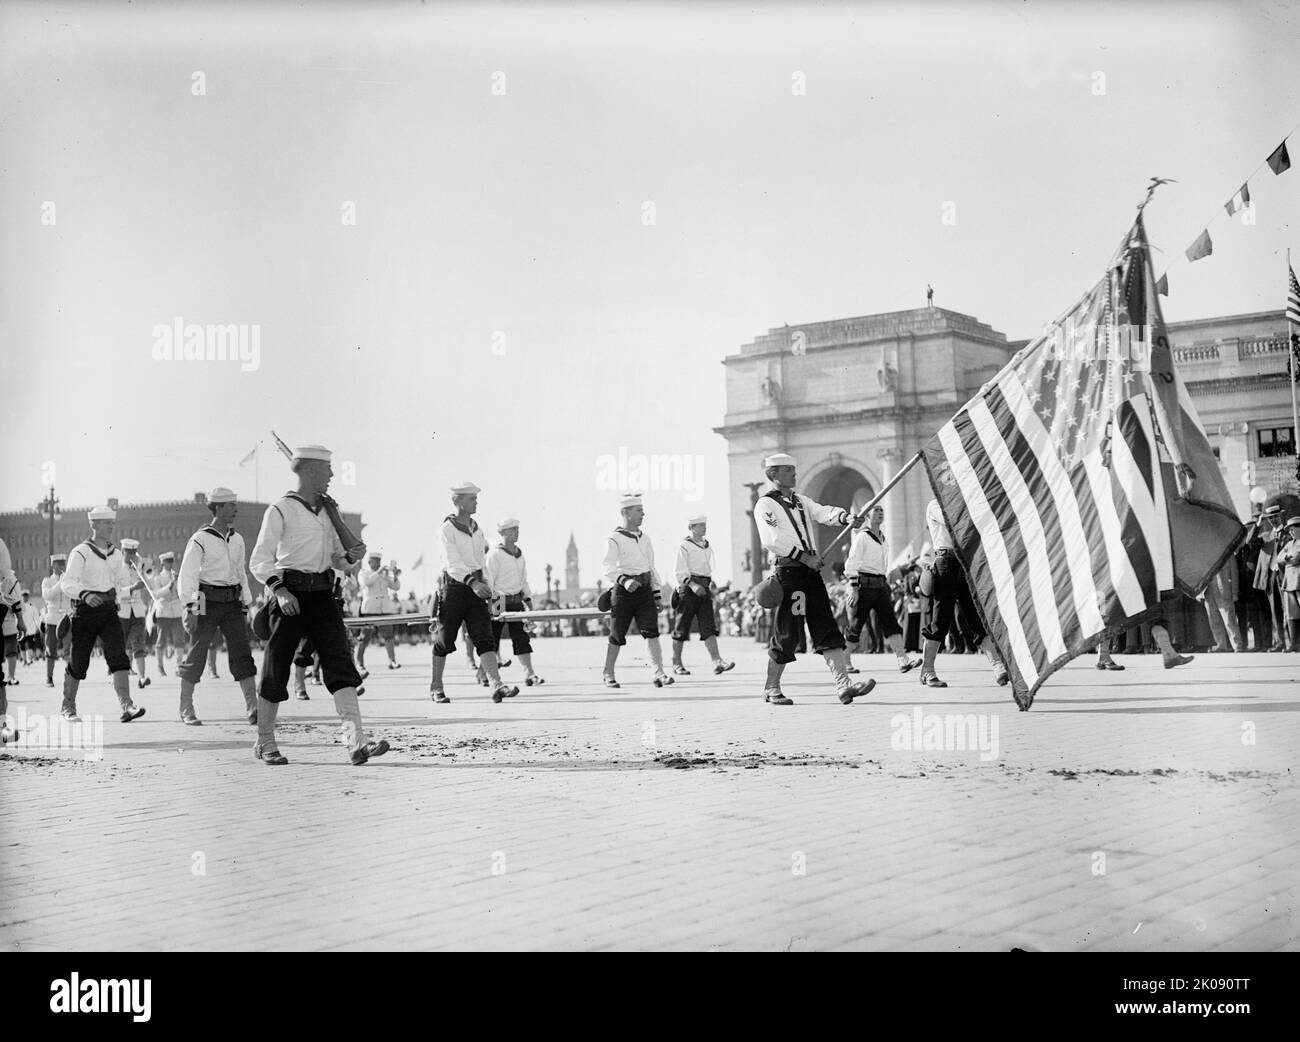 Columbus Memorial. Parade At Unveiling, 1912. [The Columbus Fountain, also known as the Columbus Memorial, was unveiled in Washington, D.C. in 1912. It was designed by Lorado Taft. Seen here are US Navy sailors on parade as part of the celebrations]. Stock Photo